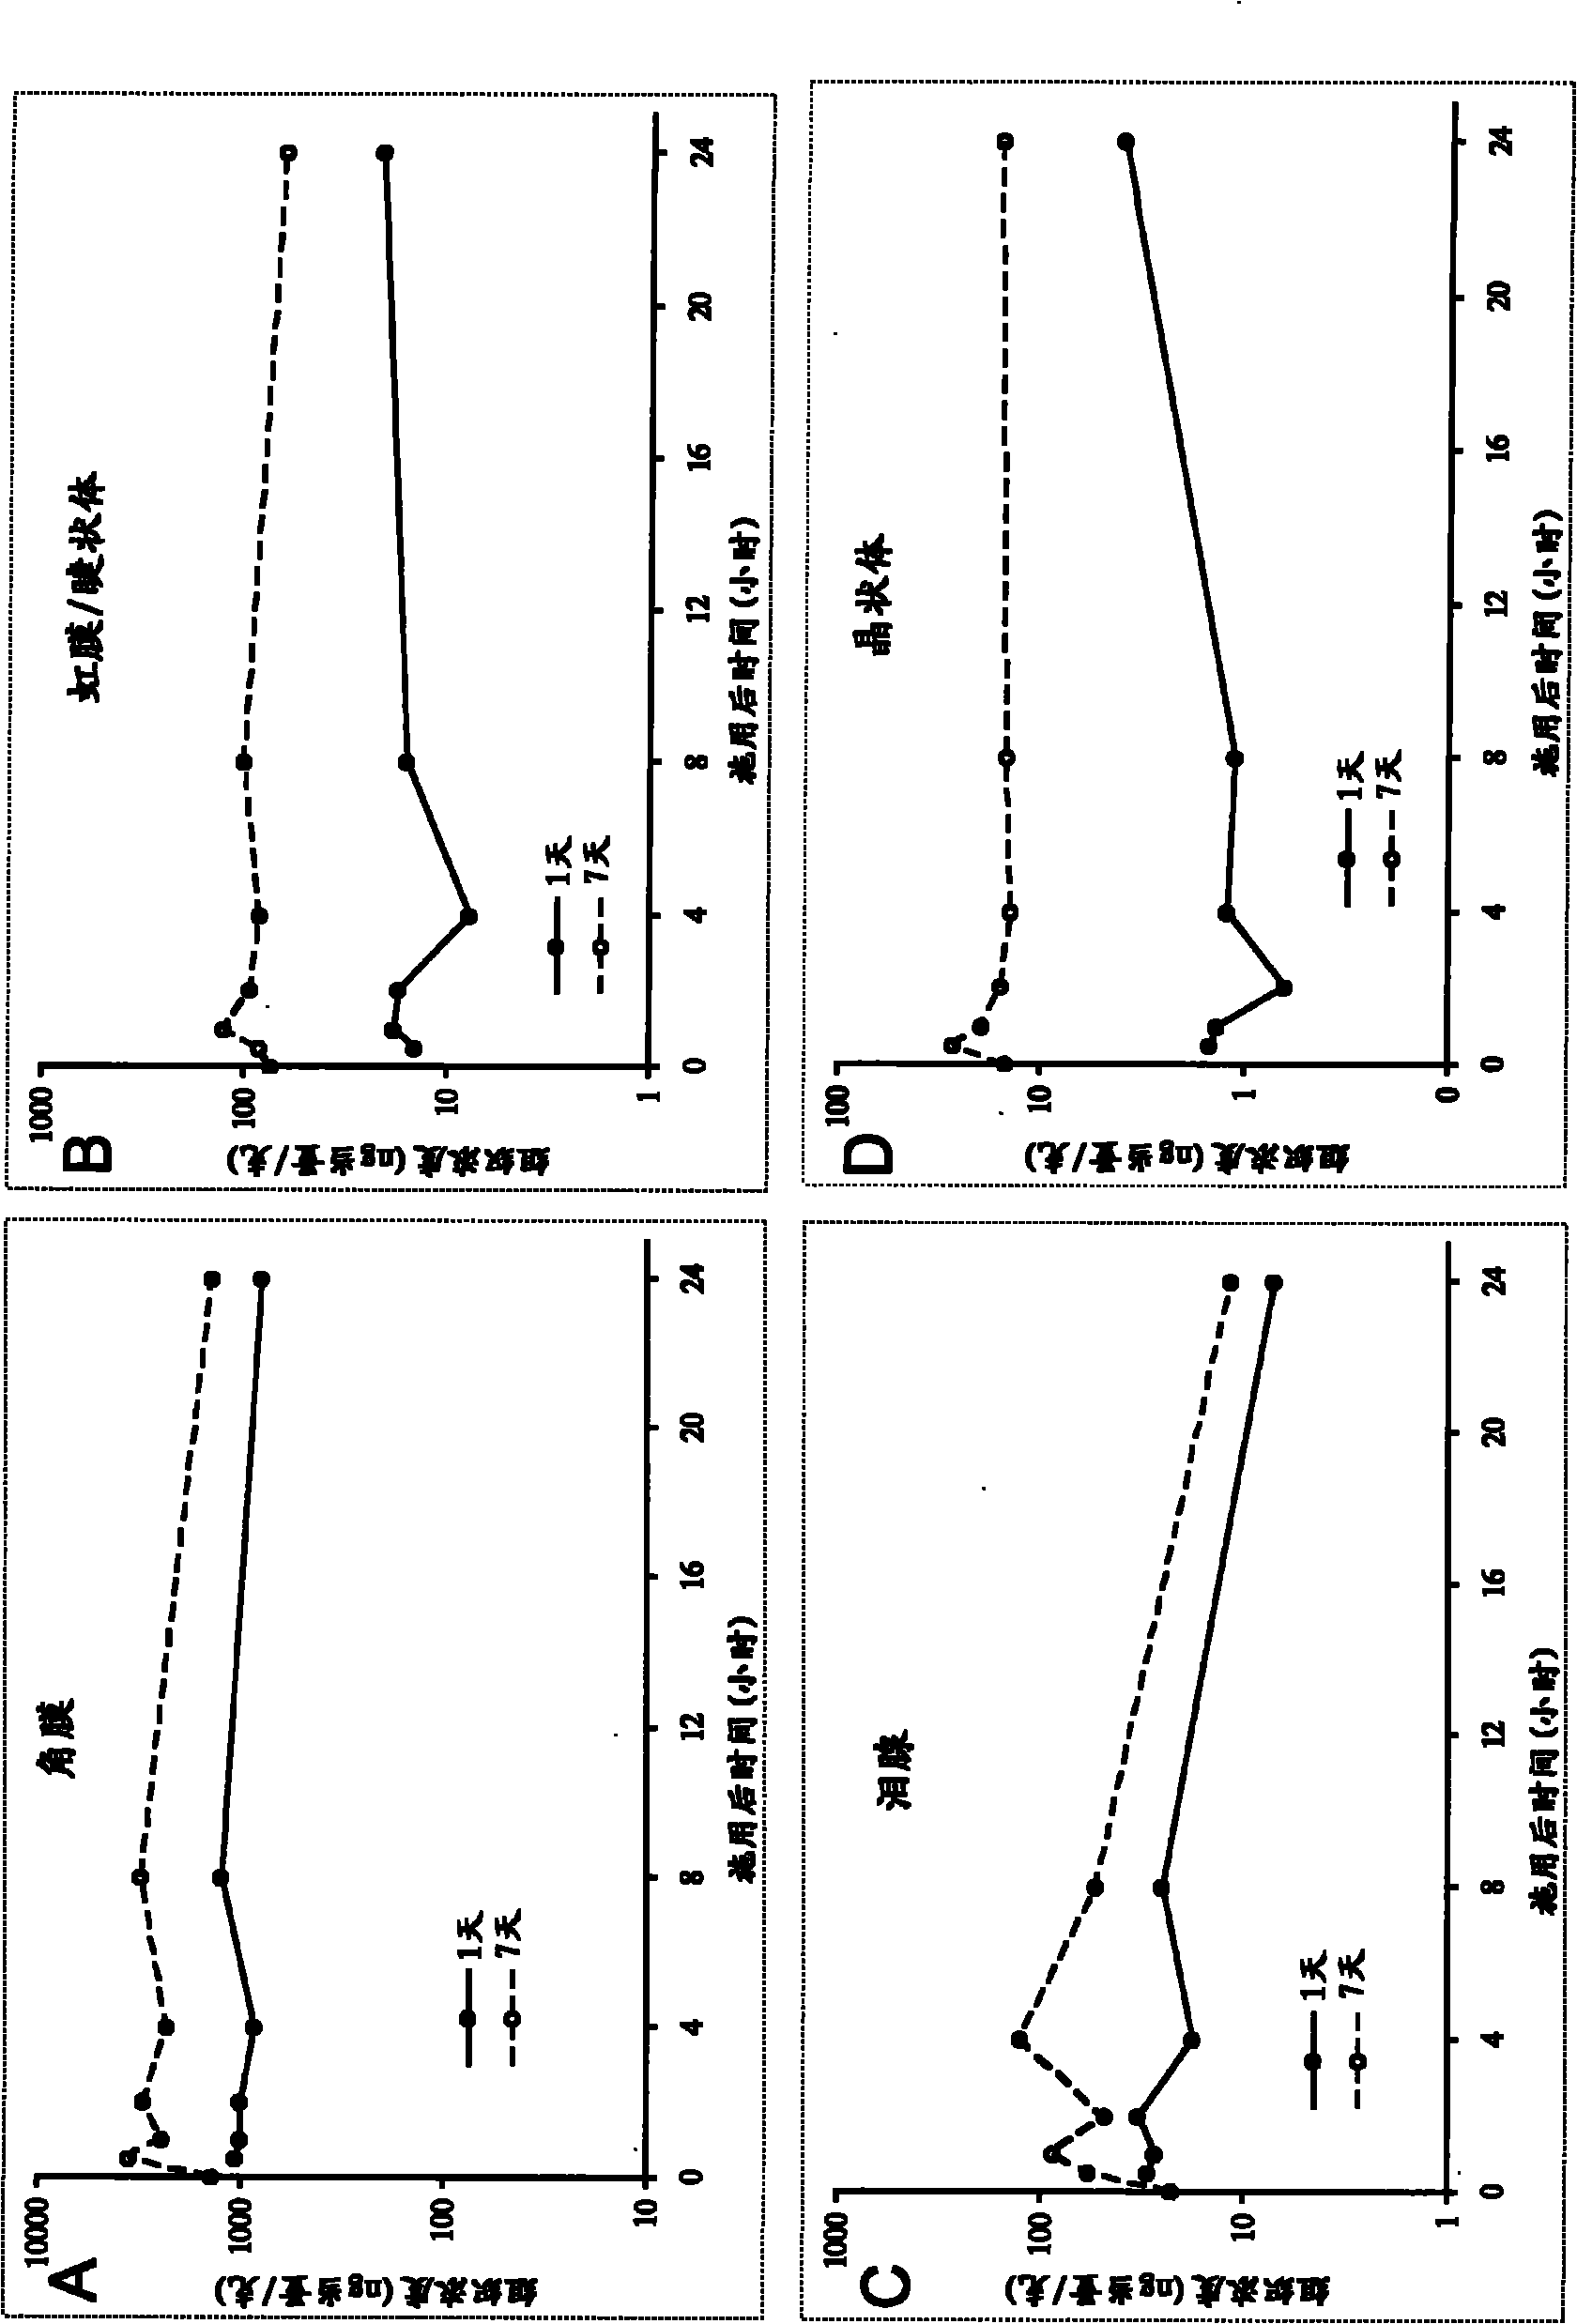 Ophthalmic compositions comprising calcineurin inhibitors or mTOR inhibitors